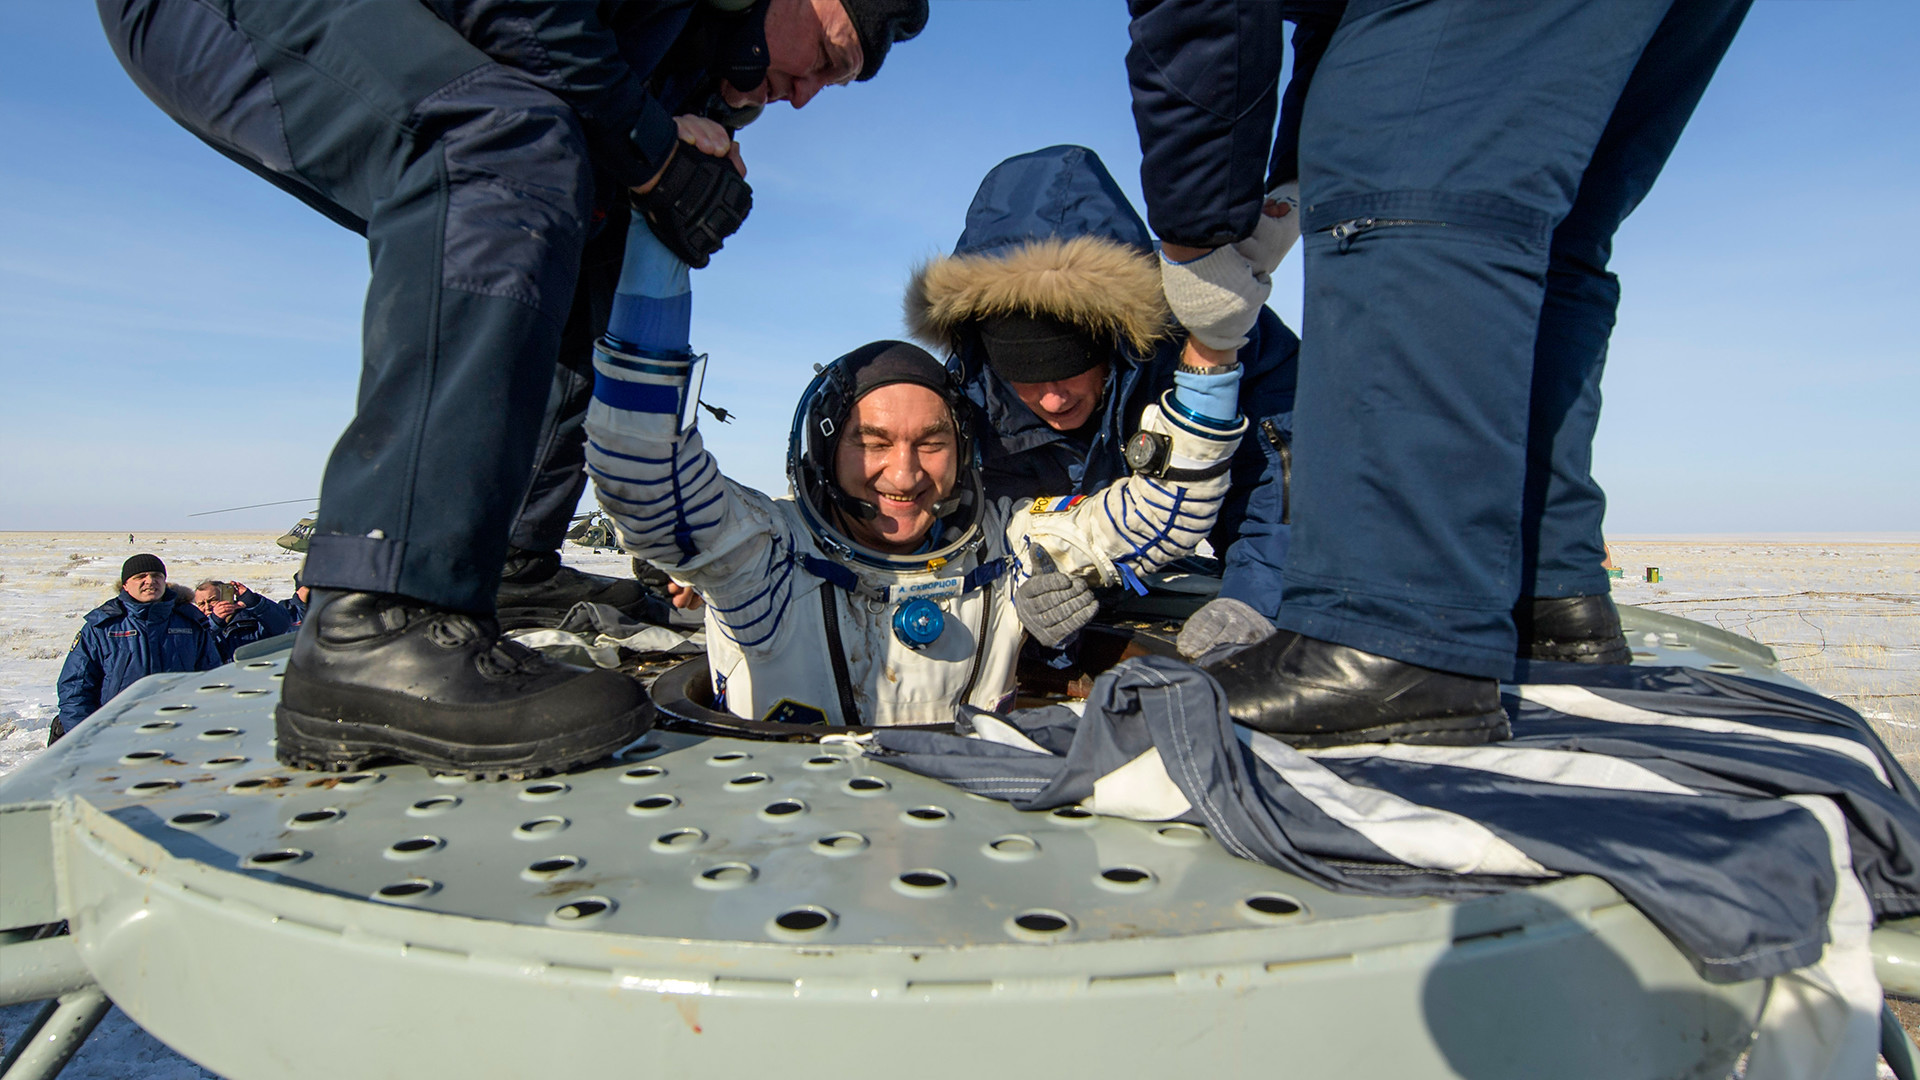 Roscosmos cosmonaut Alexander Skvortsov is helped out of the Soyuz MS-13 spacecraft just minutes after he landed their Soyuz MS-13 capsule in a remote area near the town of Zhezkazgan, on February 6, 2020 in Kazakhstan